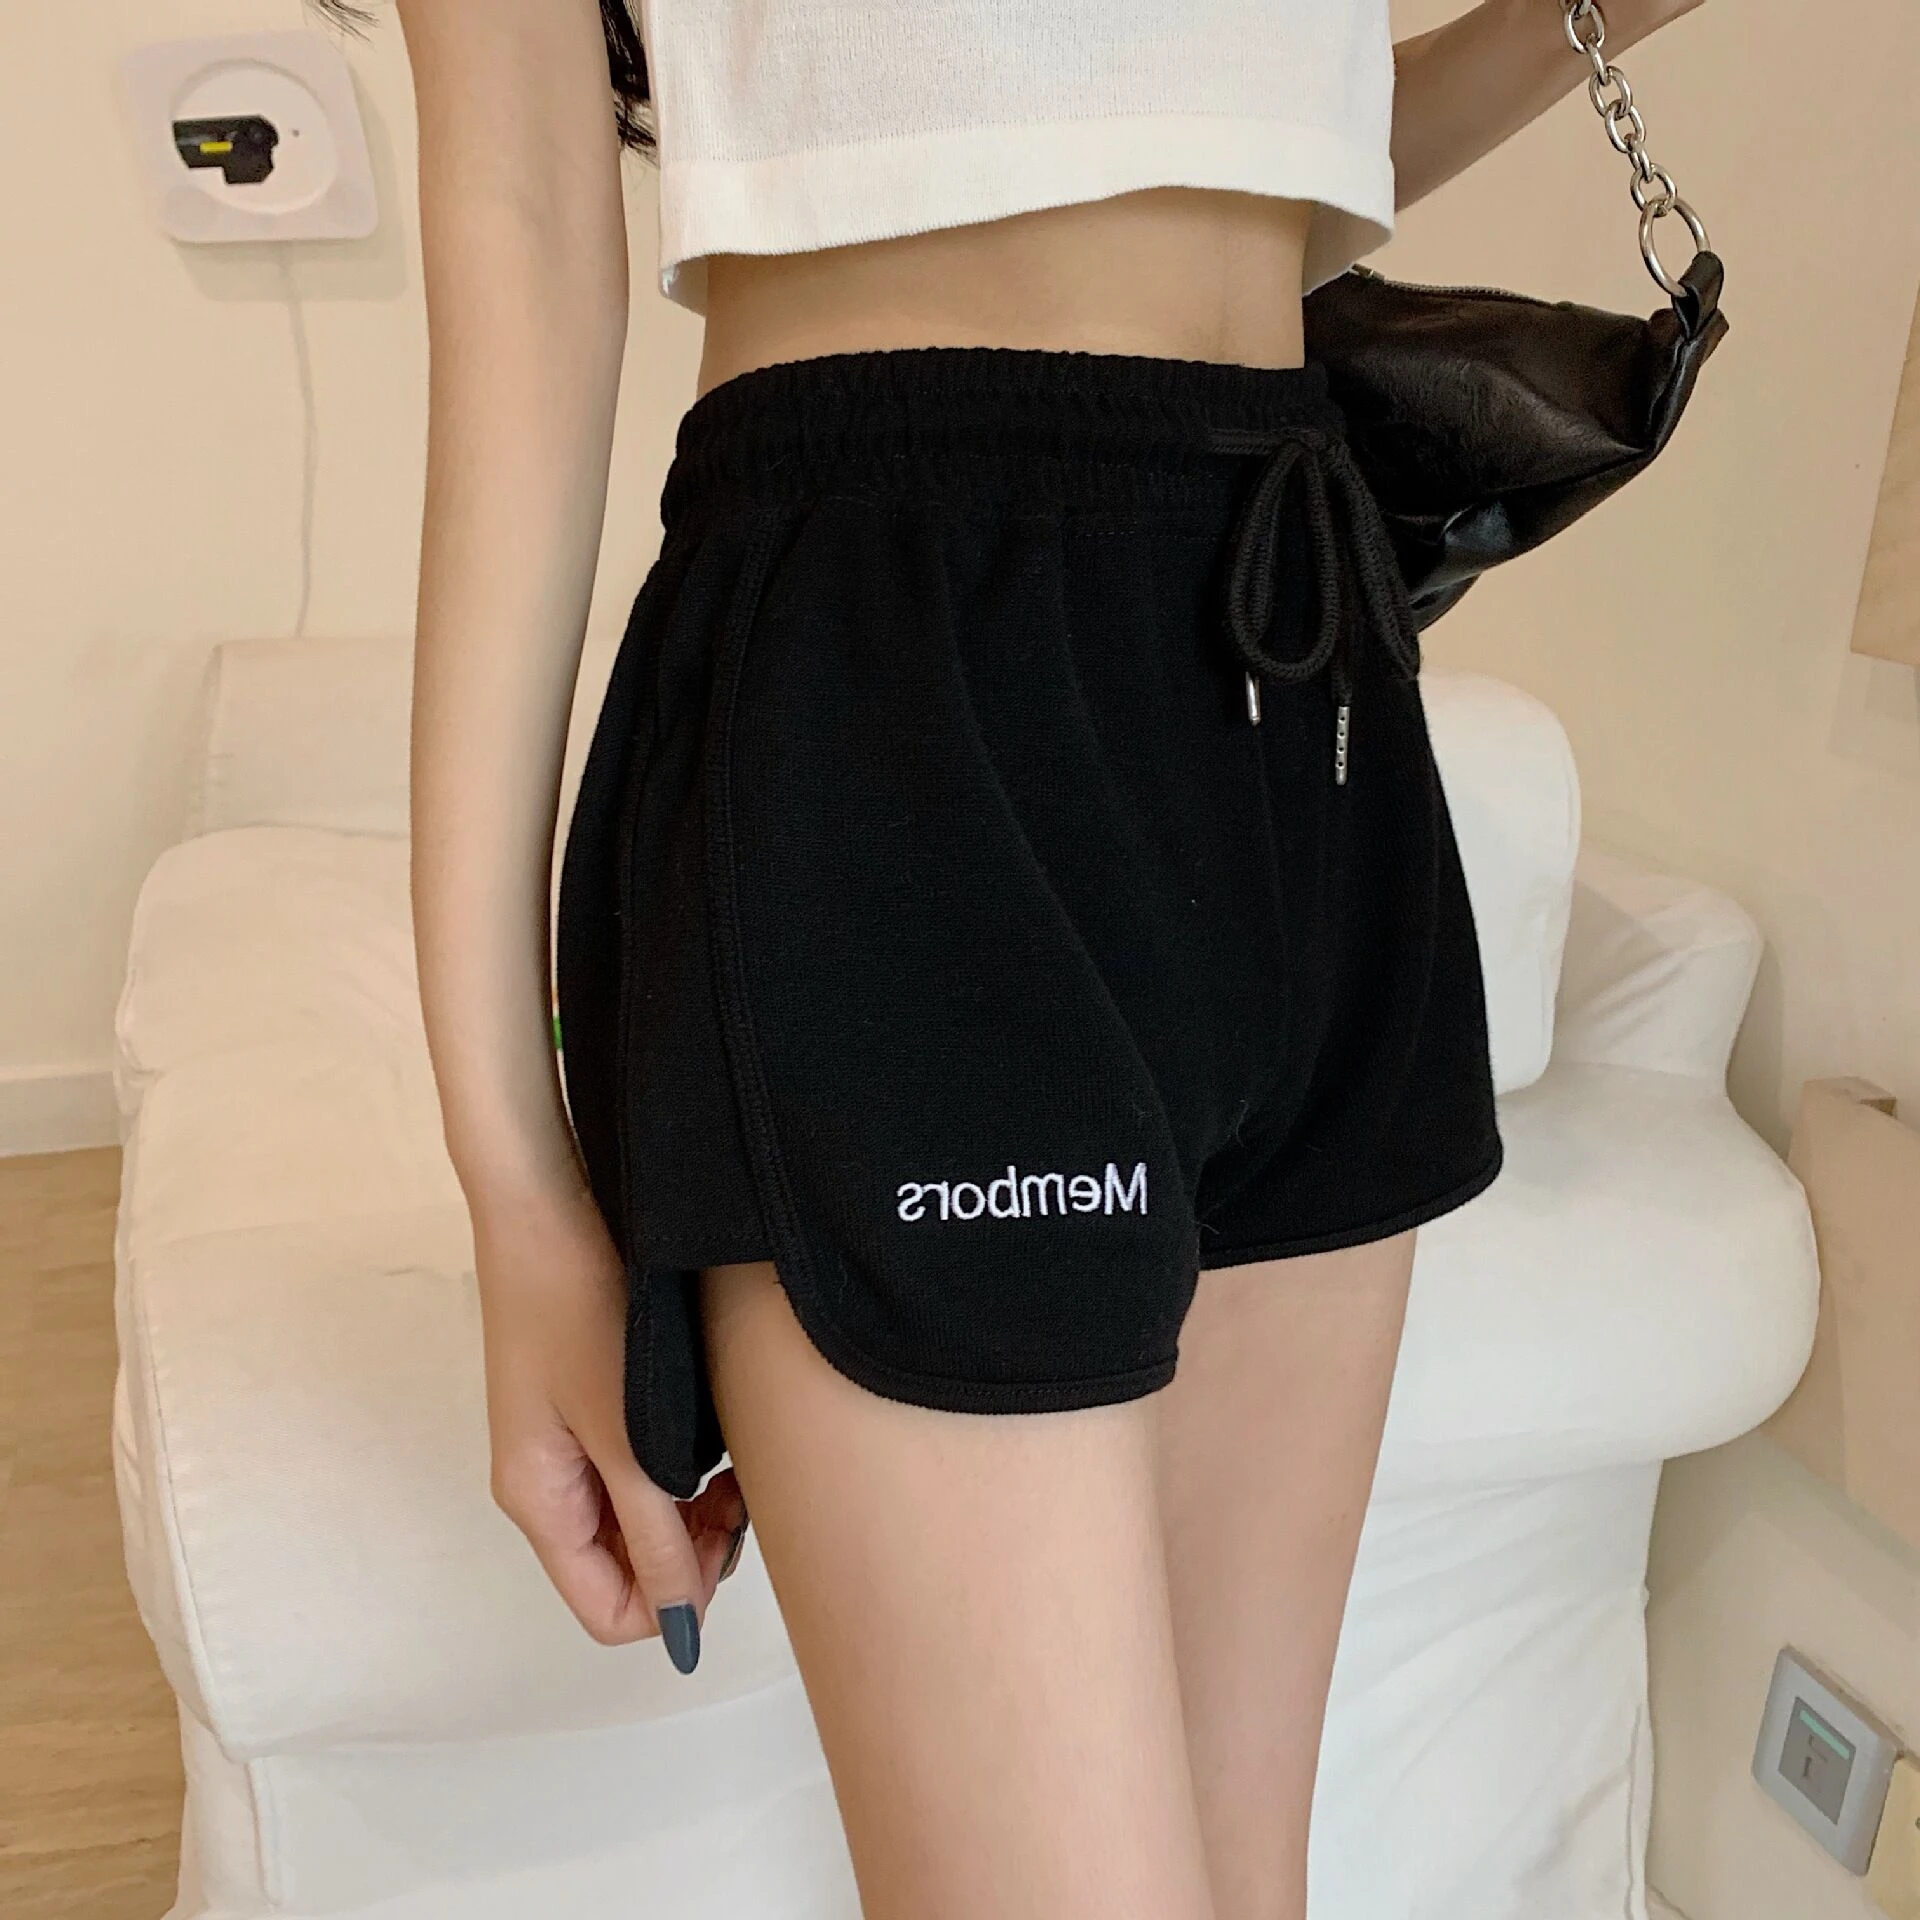 Women Short Pant Summer Casual Lady Loose Solid Soft Cotton Leisure Female Workout Waistband Skinny Stretch Shorts XQM